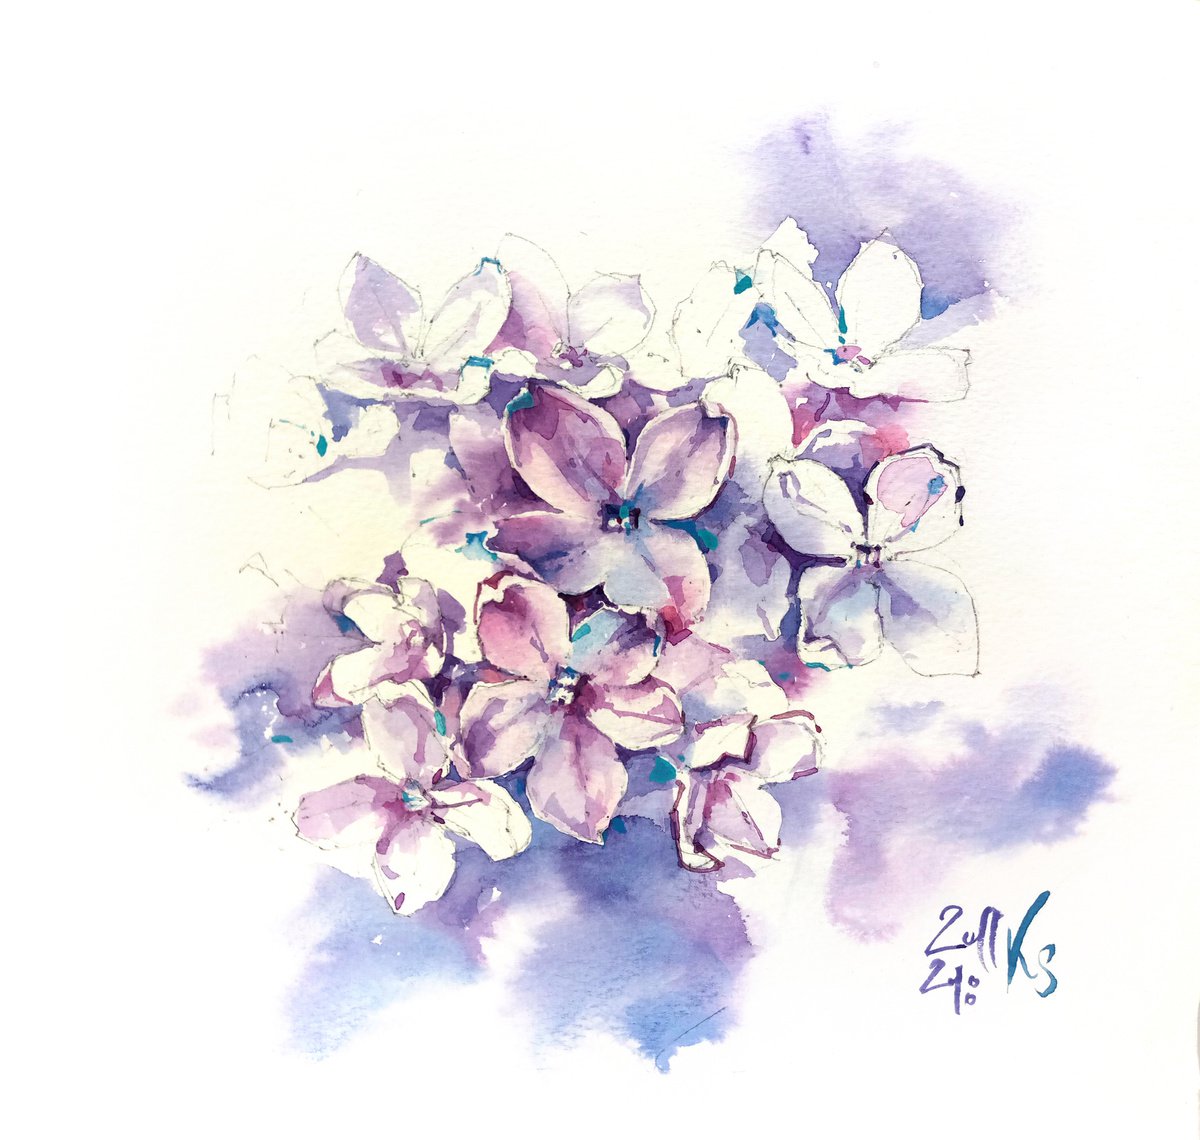 Original watercolor painting Thousand Shades of Lilac Flowers by Ksenia Selianko